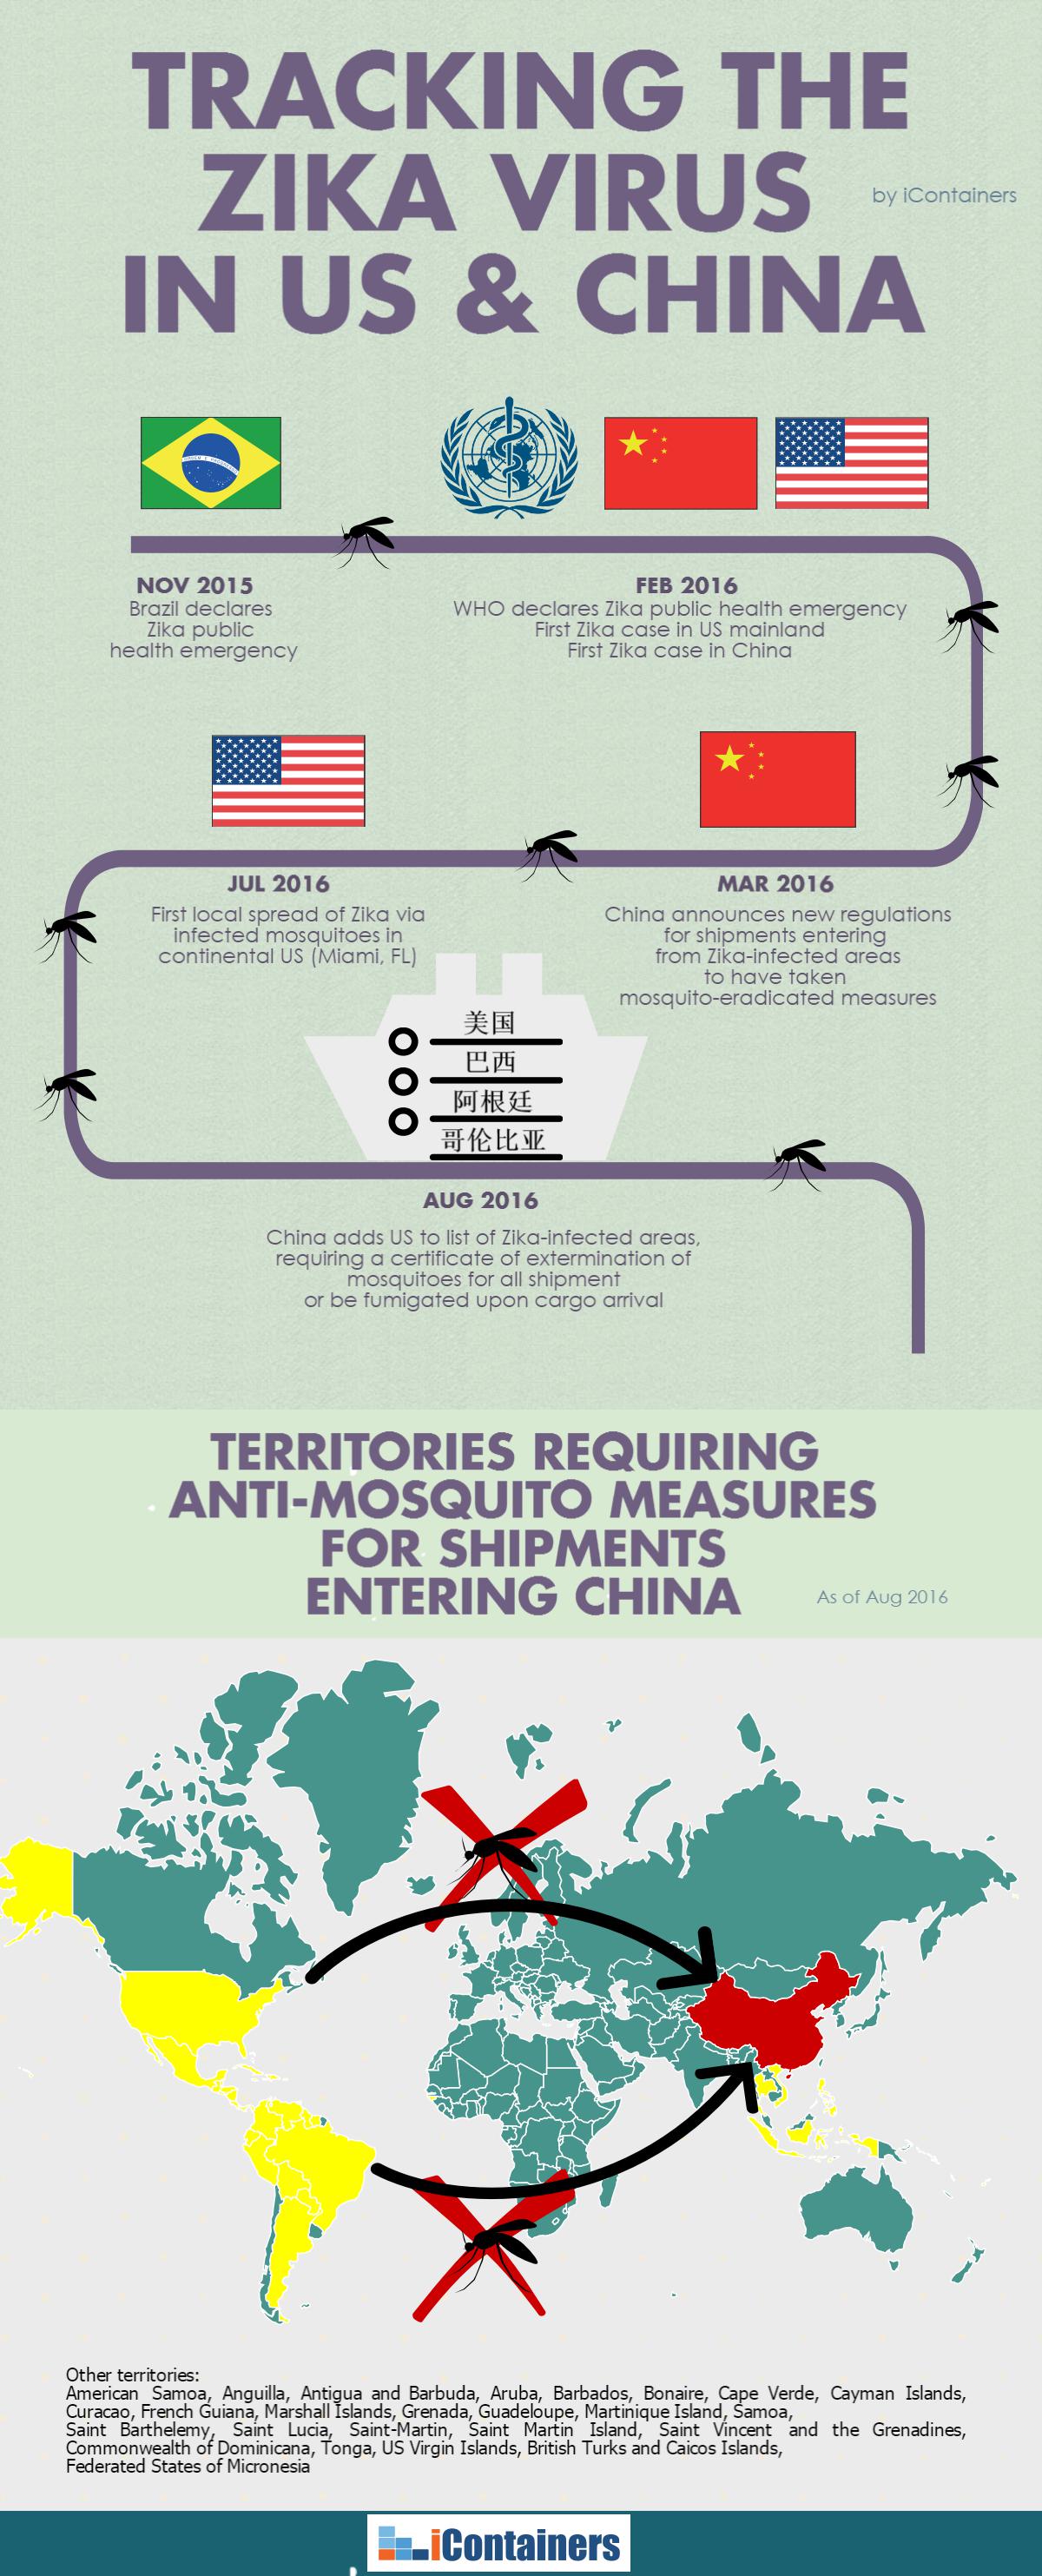 UPDATED: Anti-Zika treatment for US exports to China - iContainers1200 x 2966